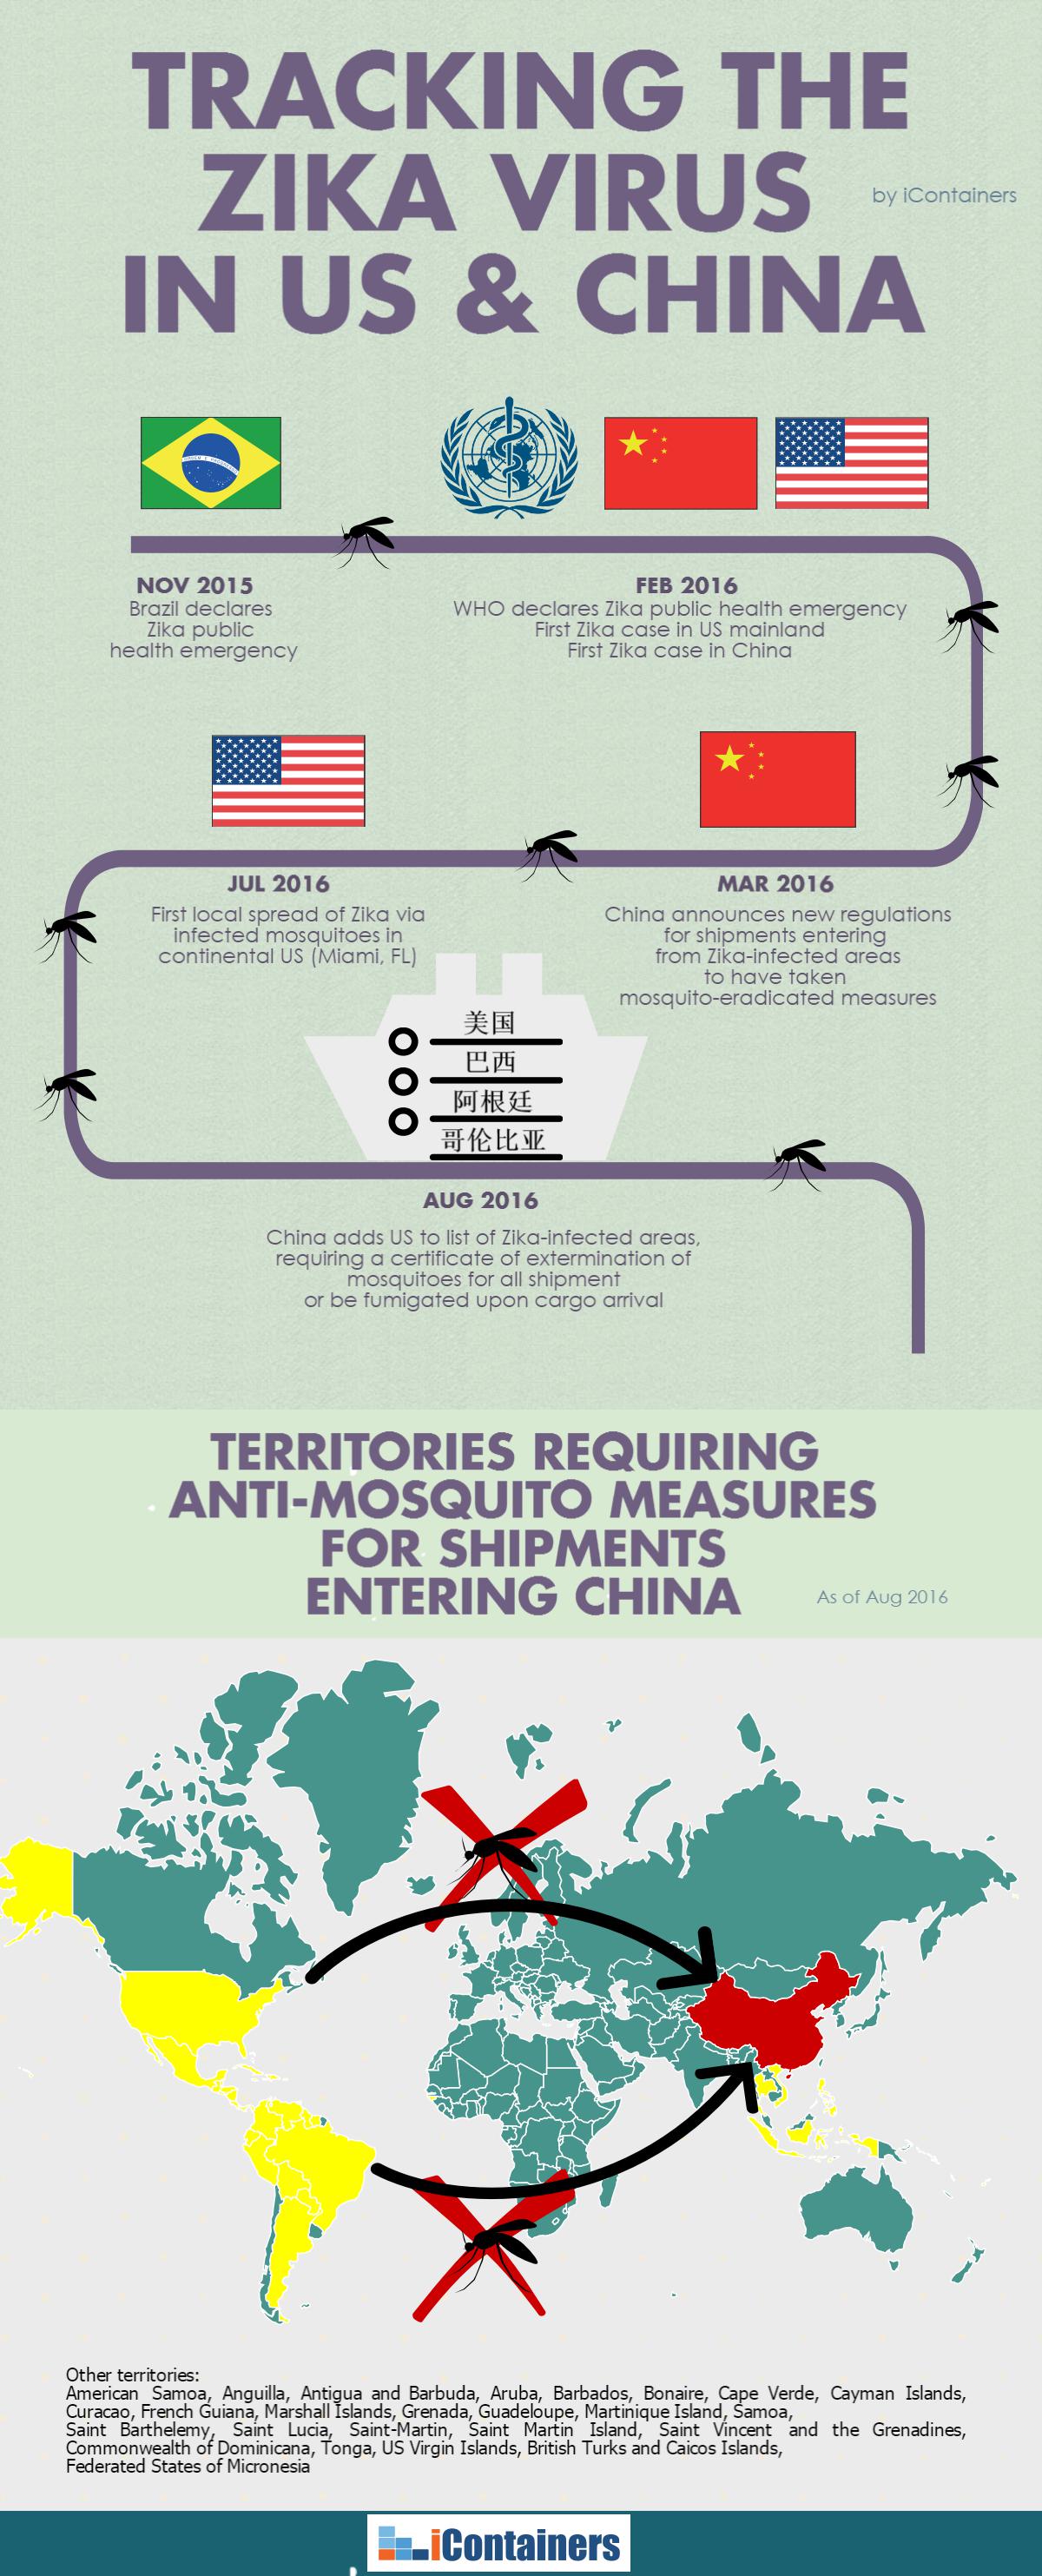 UPDATED: Anti-Zika treatment for US exports to China - iContainers1200 x 2966